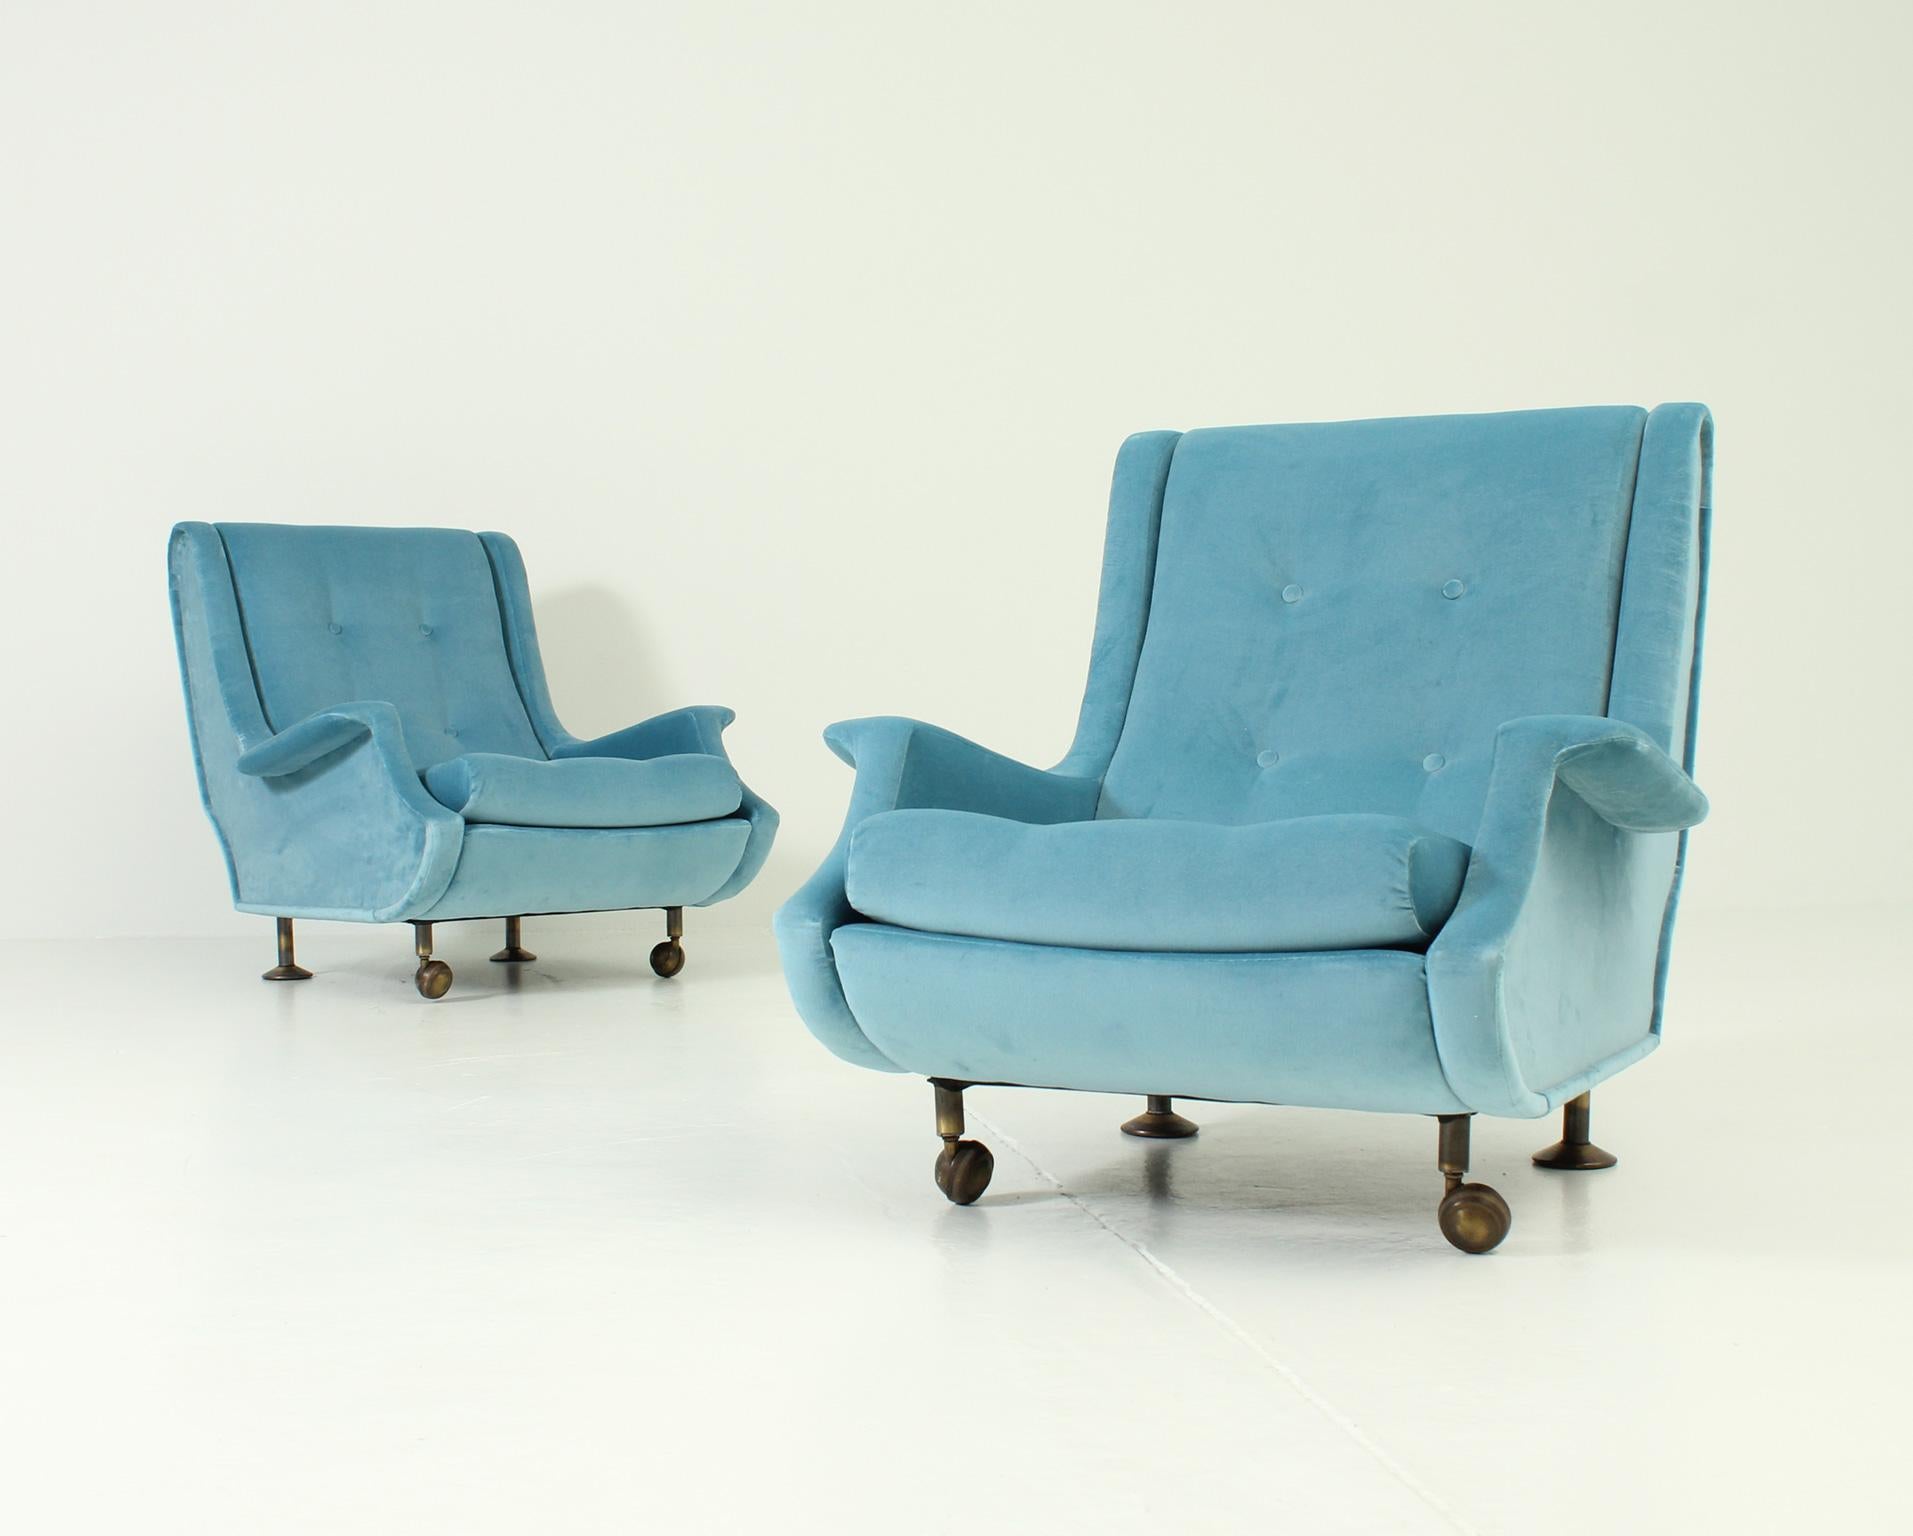 Pair of Regent armchairs designed in 1960 by Marco Zanuso for Arflex, Italy. Reupholstered with new foam and cotton velvet fabric.